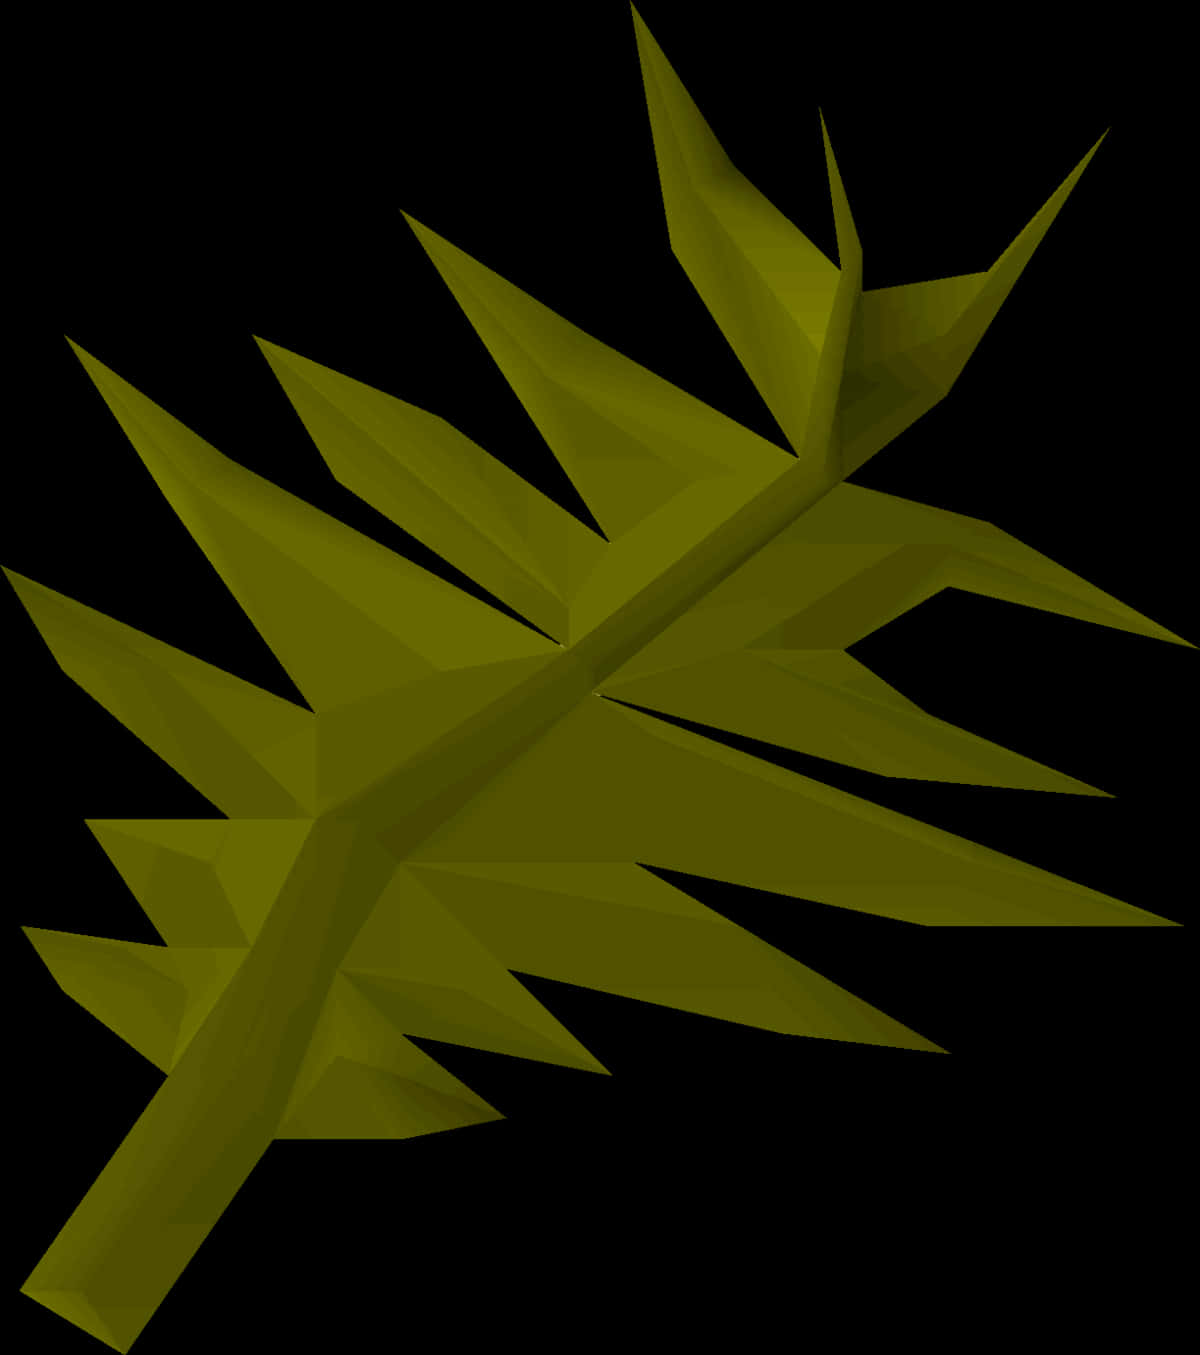 Abstract Cannabis Leaf Graphic PNG image